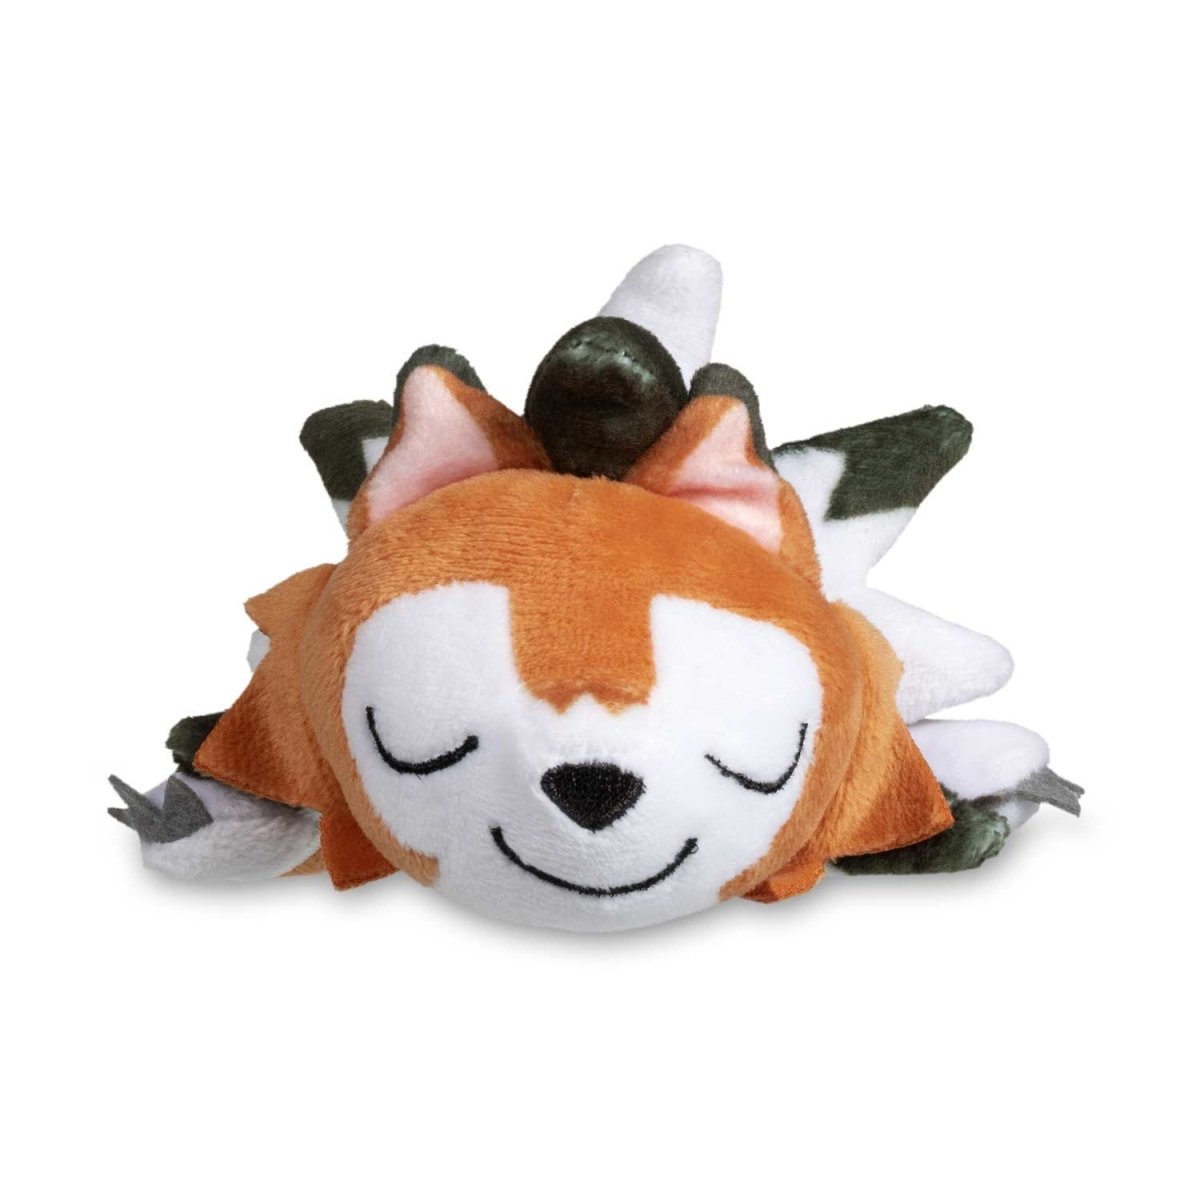 Surprise! Shiny Mimikyu And Dusk Form Lycanroc Plush Are Now Out